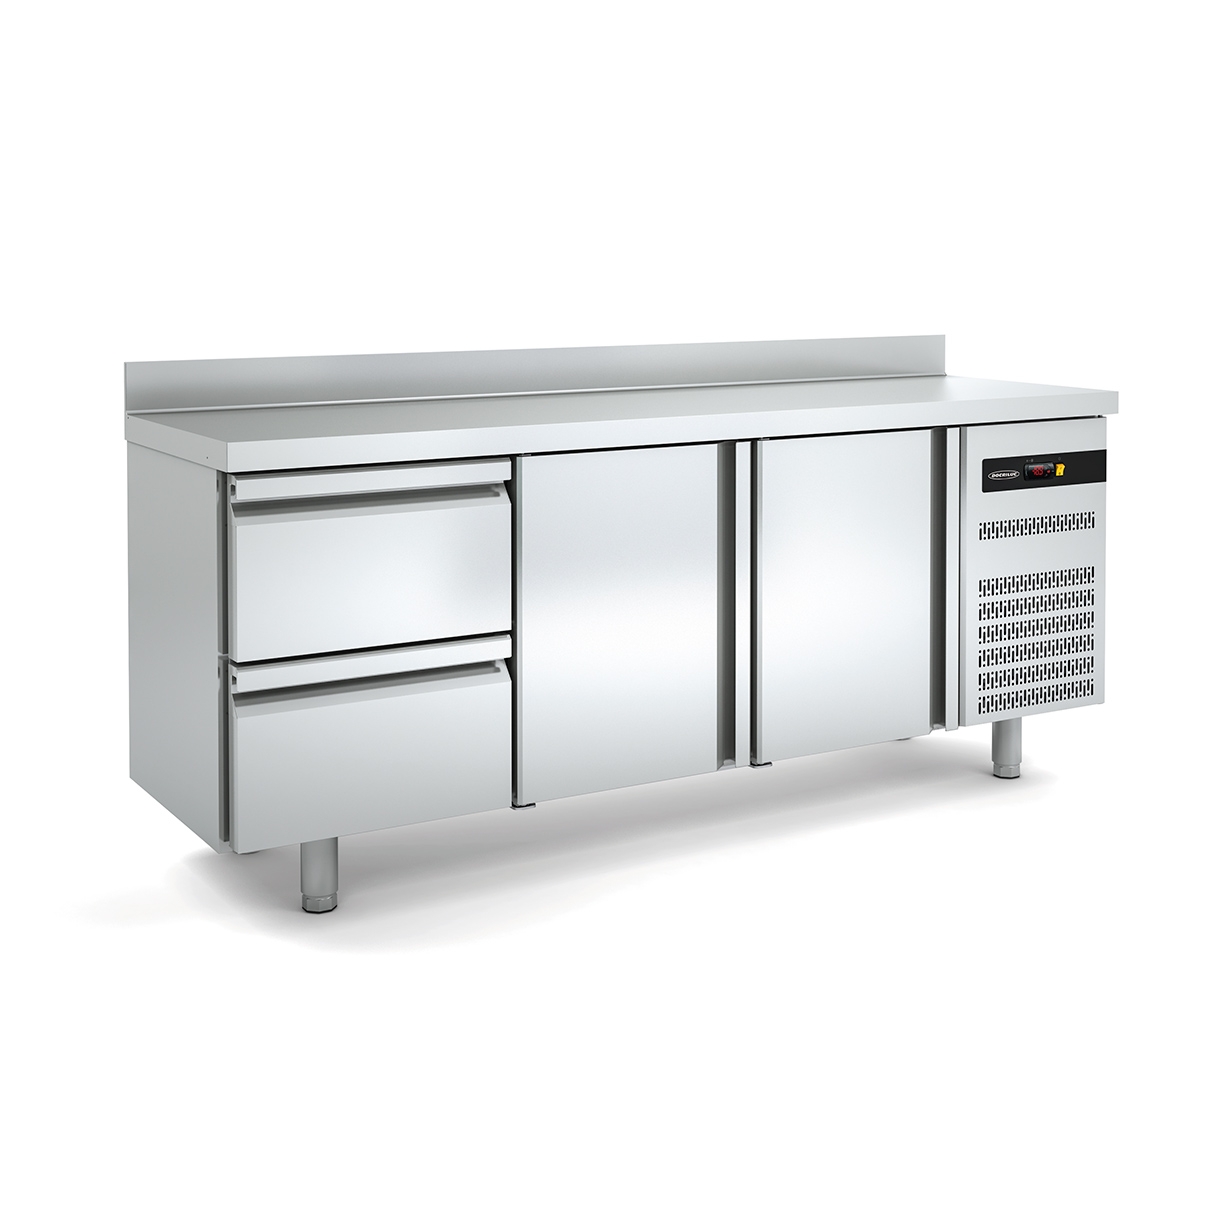 SNACK Refrigerated Counter MD-C